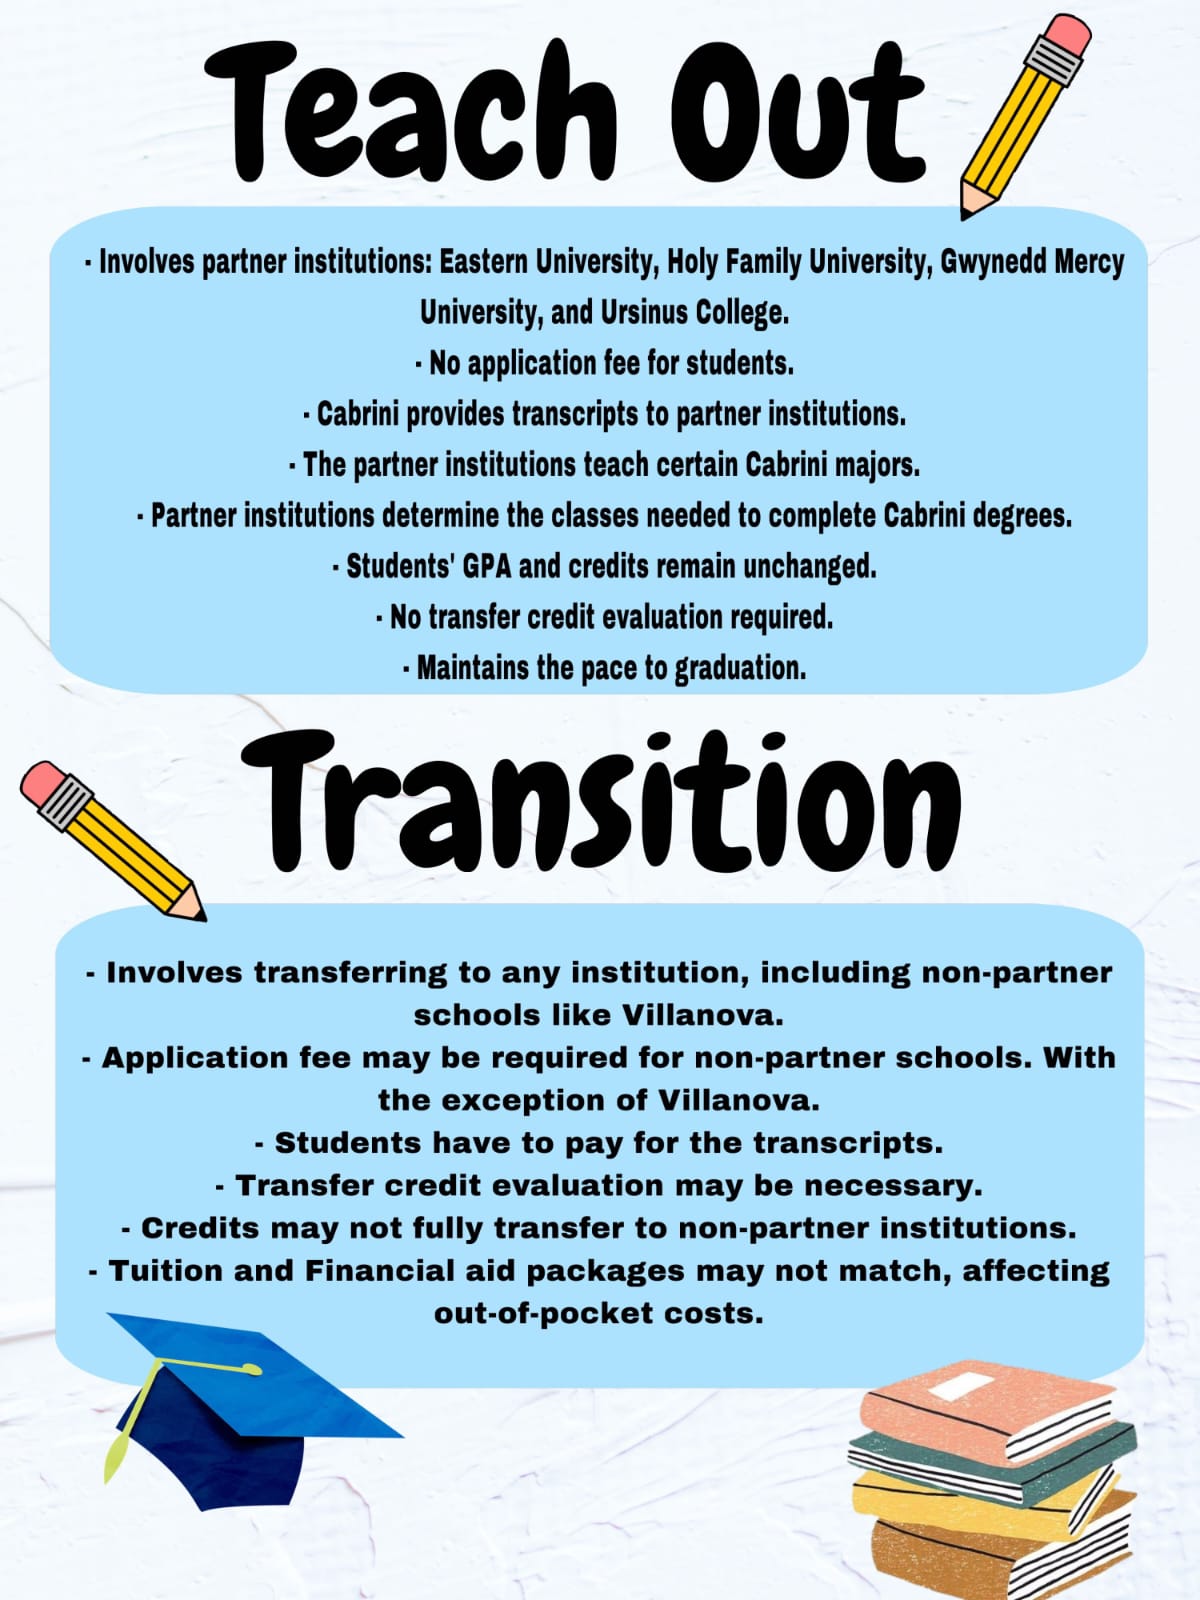 Teachout and Transition Infographic by Paige Bowman.